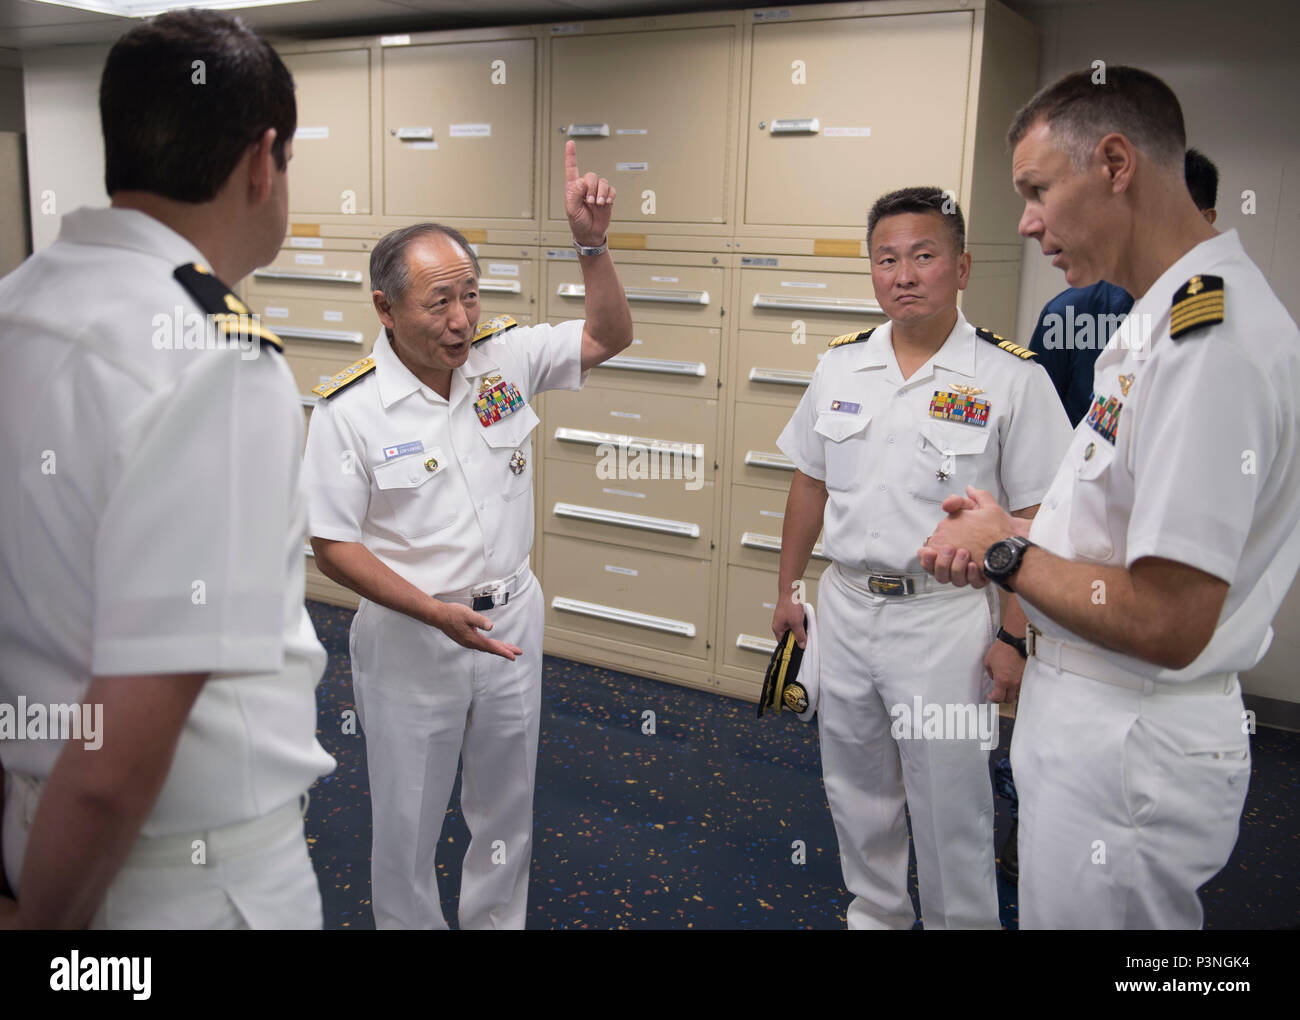 160717-N-QW941-253 DA NANG, Vietnam (July 17, 2016) Admiral Katsutoshi Kawano (second from left), chief of staff of the Joint Staff, Japanese Self-Defense Force, tours hospital ship USNS Mercy (T-AH 19), with Capt. Peter Roberts (right), commanding officer, Medical Treatment Facility, USNS Mercy. Kawano visited Mercy and JS Shimokita (LST-4002), which are both in Da Nang for Pacific Partnership 2016. Partner nations are working side-by-side with local military and non-government organizations to conduct cooperative health engagements, community relation events and subject matter expert exchang Stock Photo